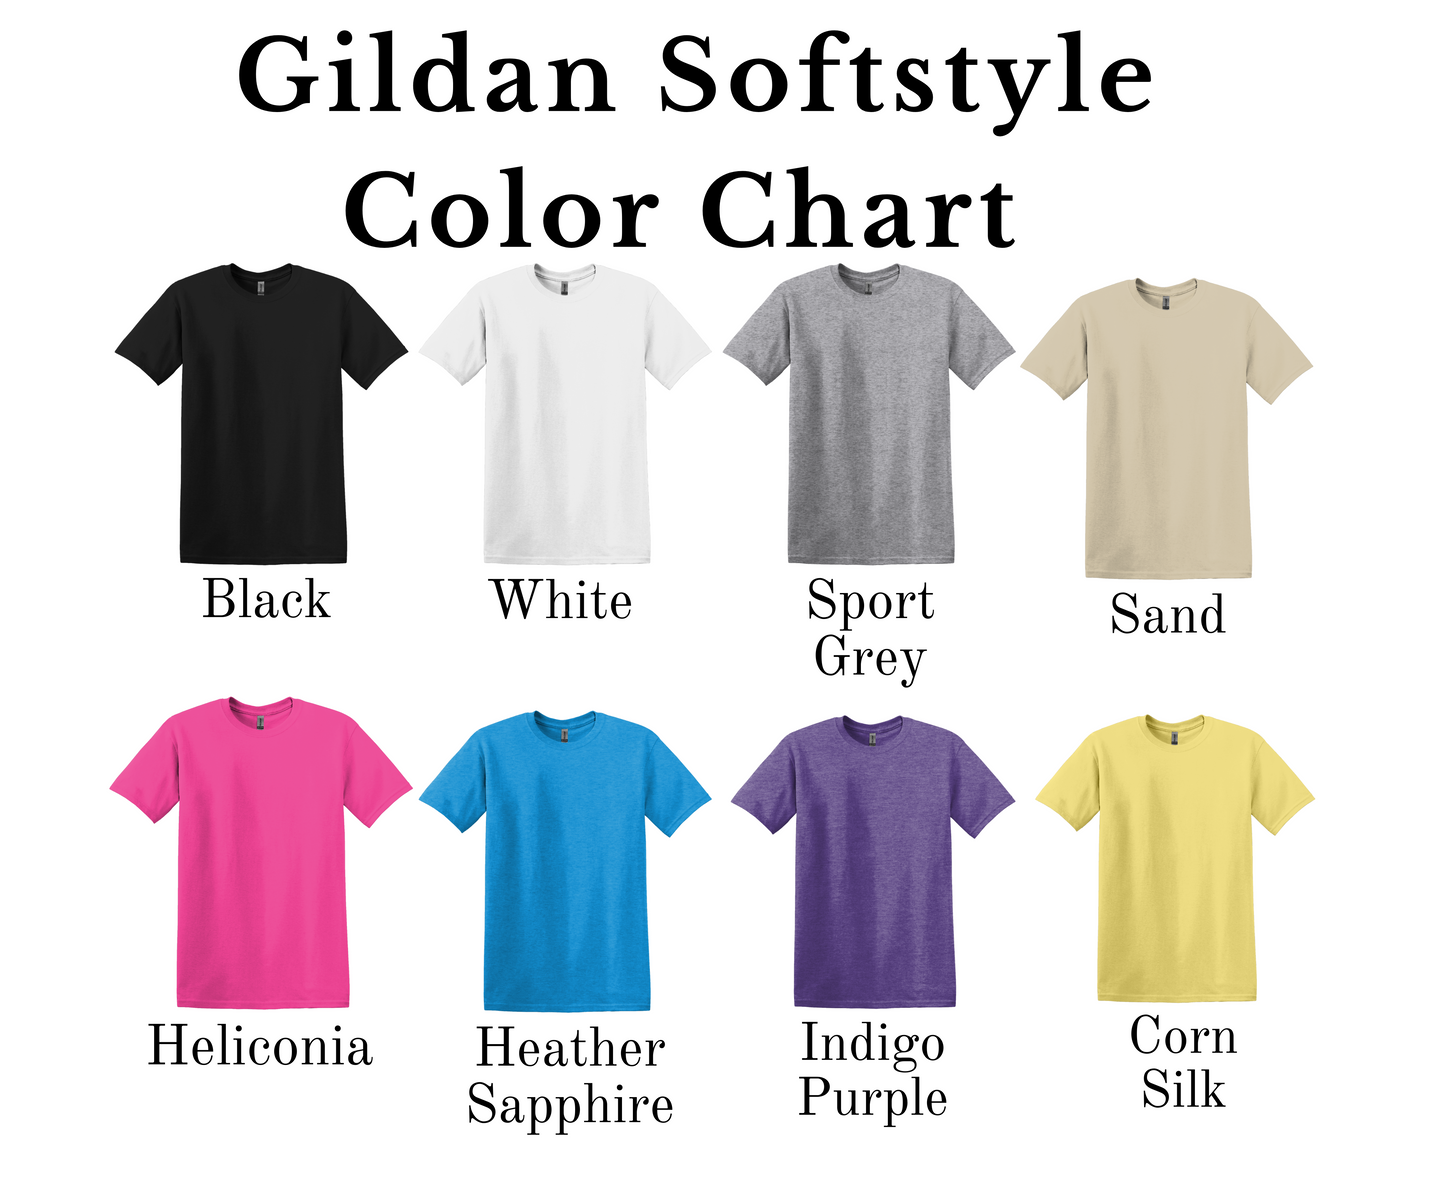 Fuck Around and Find Out Gildan Sofstyle T-shirt